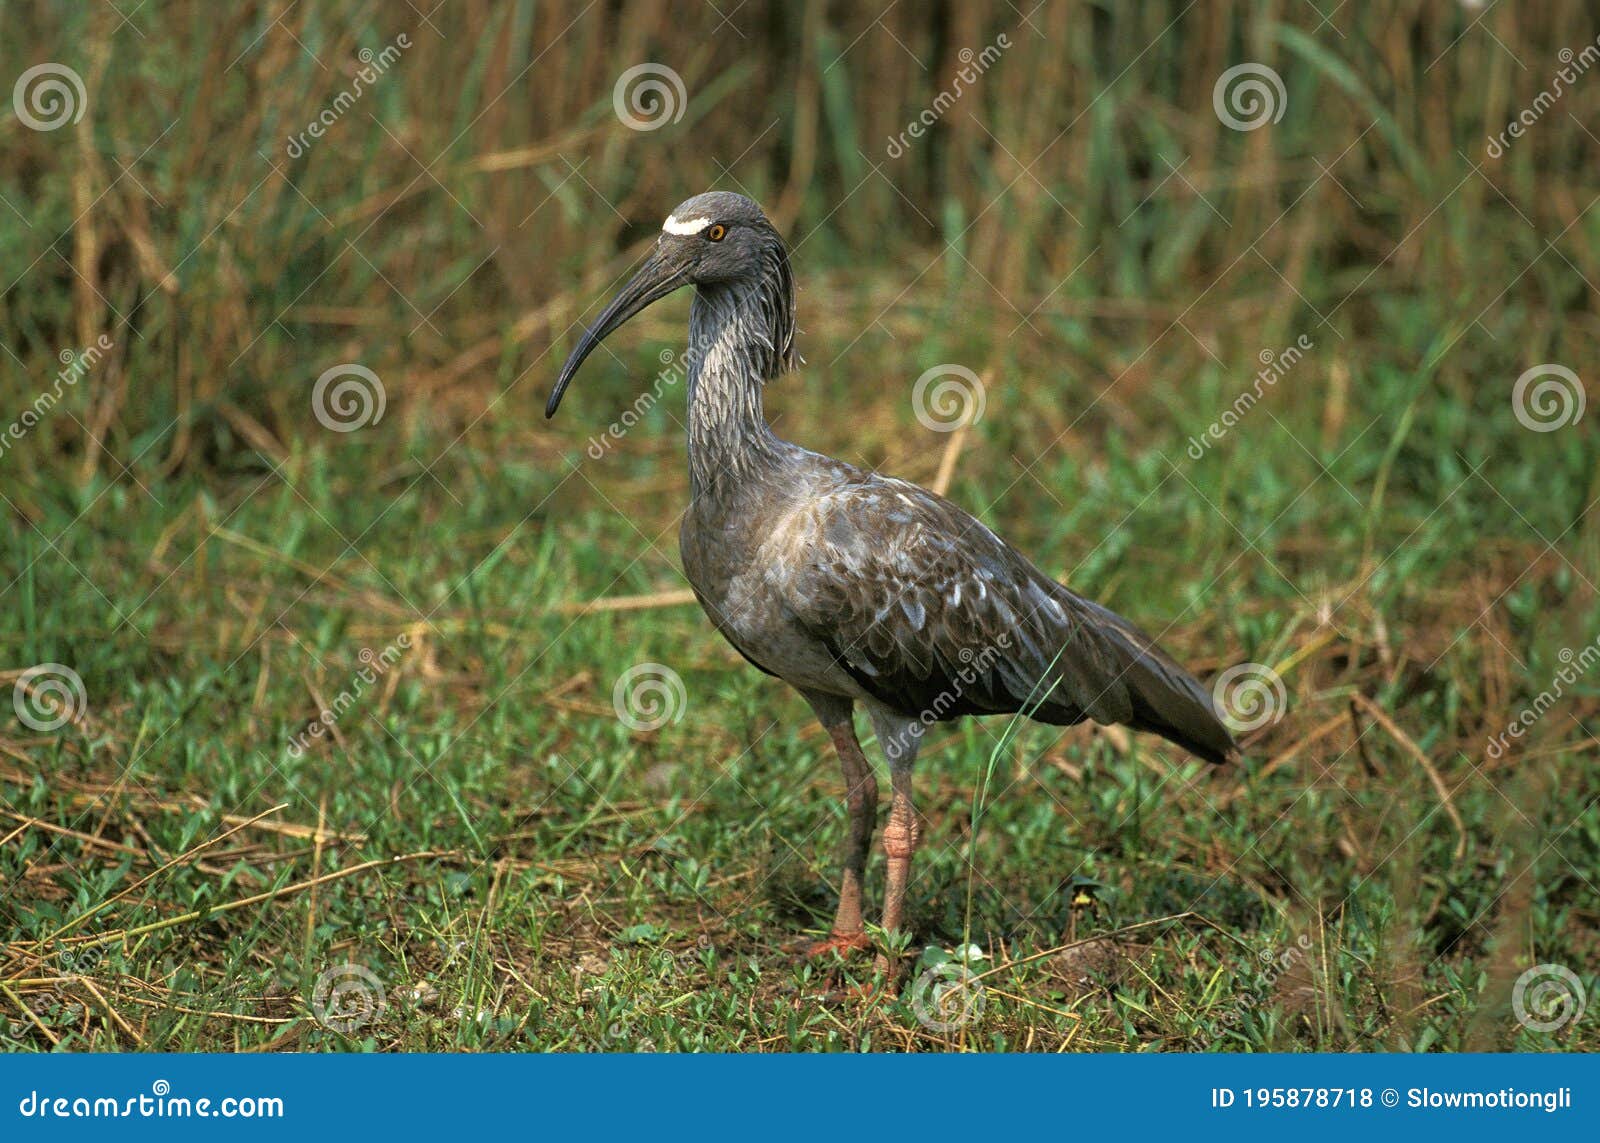 plumbeous ibis, theristicus caerulescens, adult, pantanal in brazil